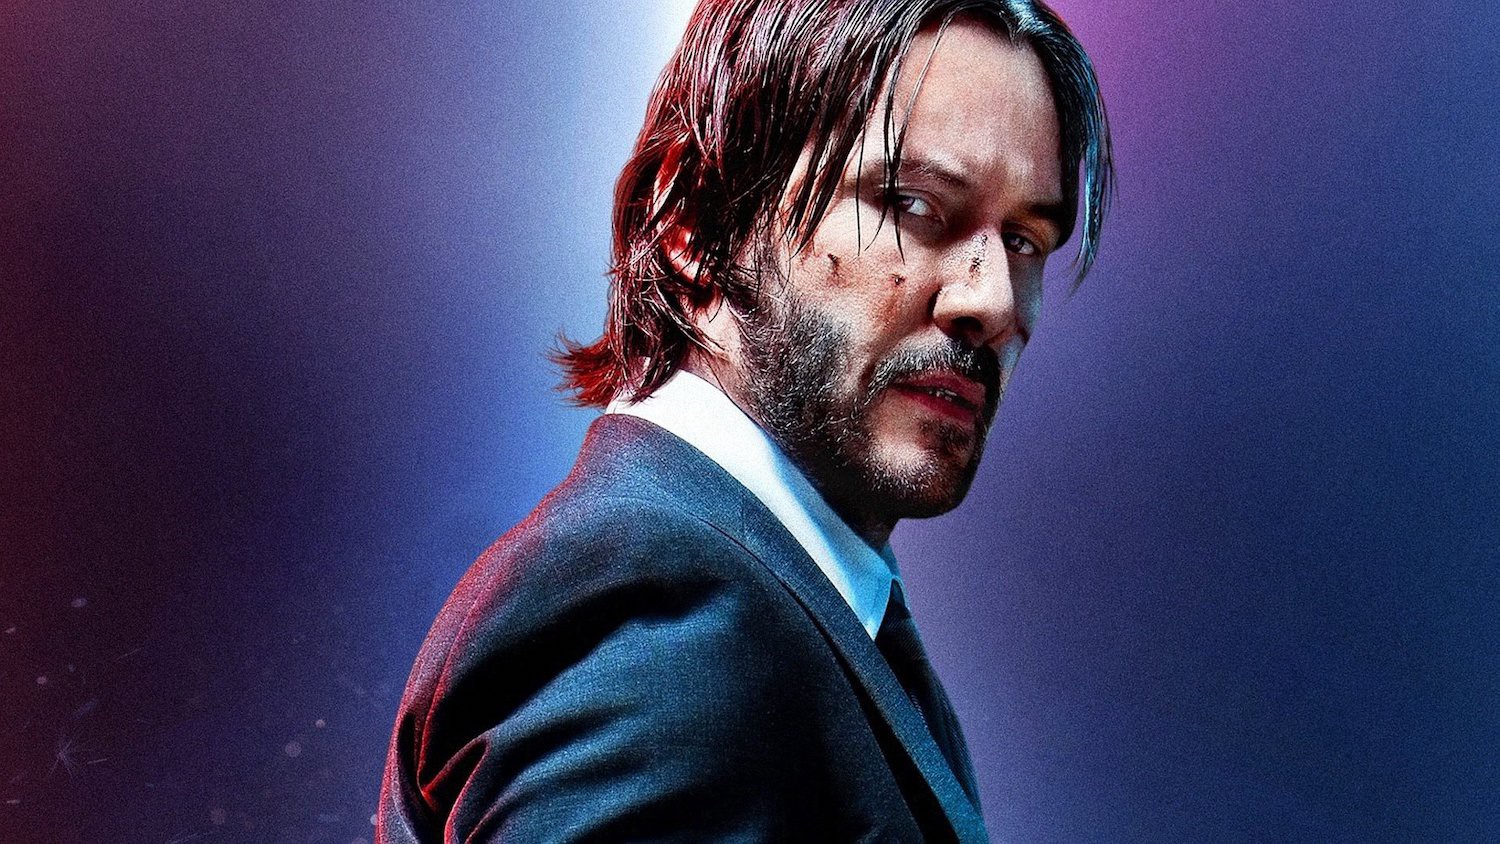 john-wick-3-has-been-relentless-in-the-box-office-of-the-national.jpg